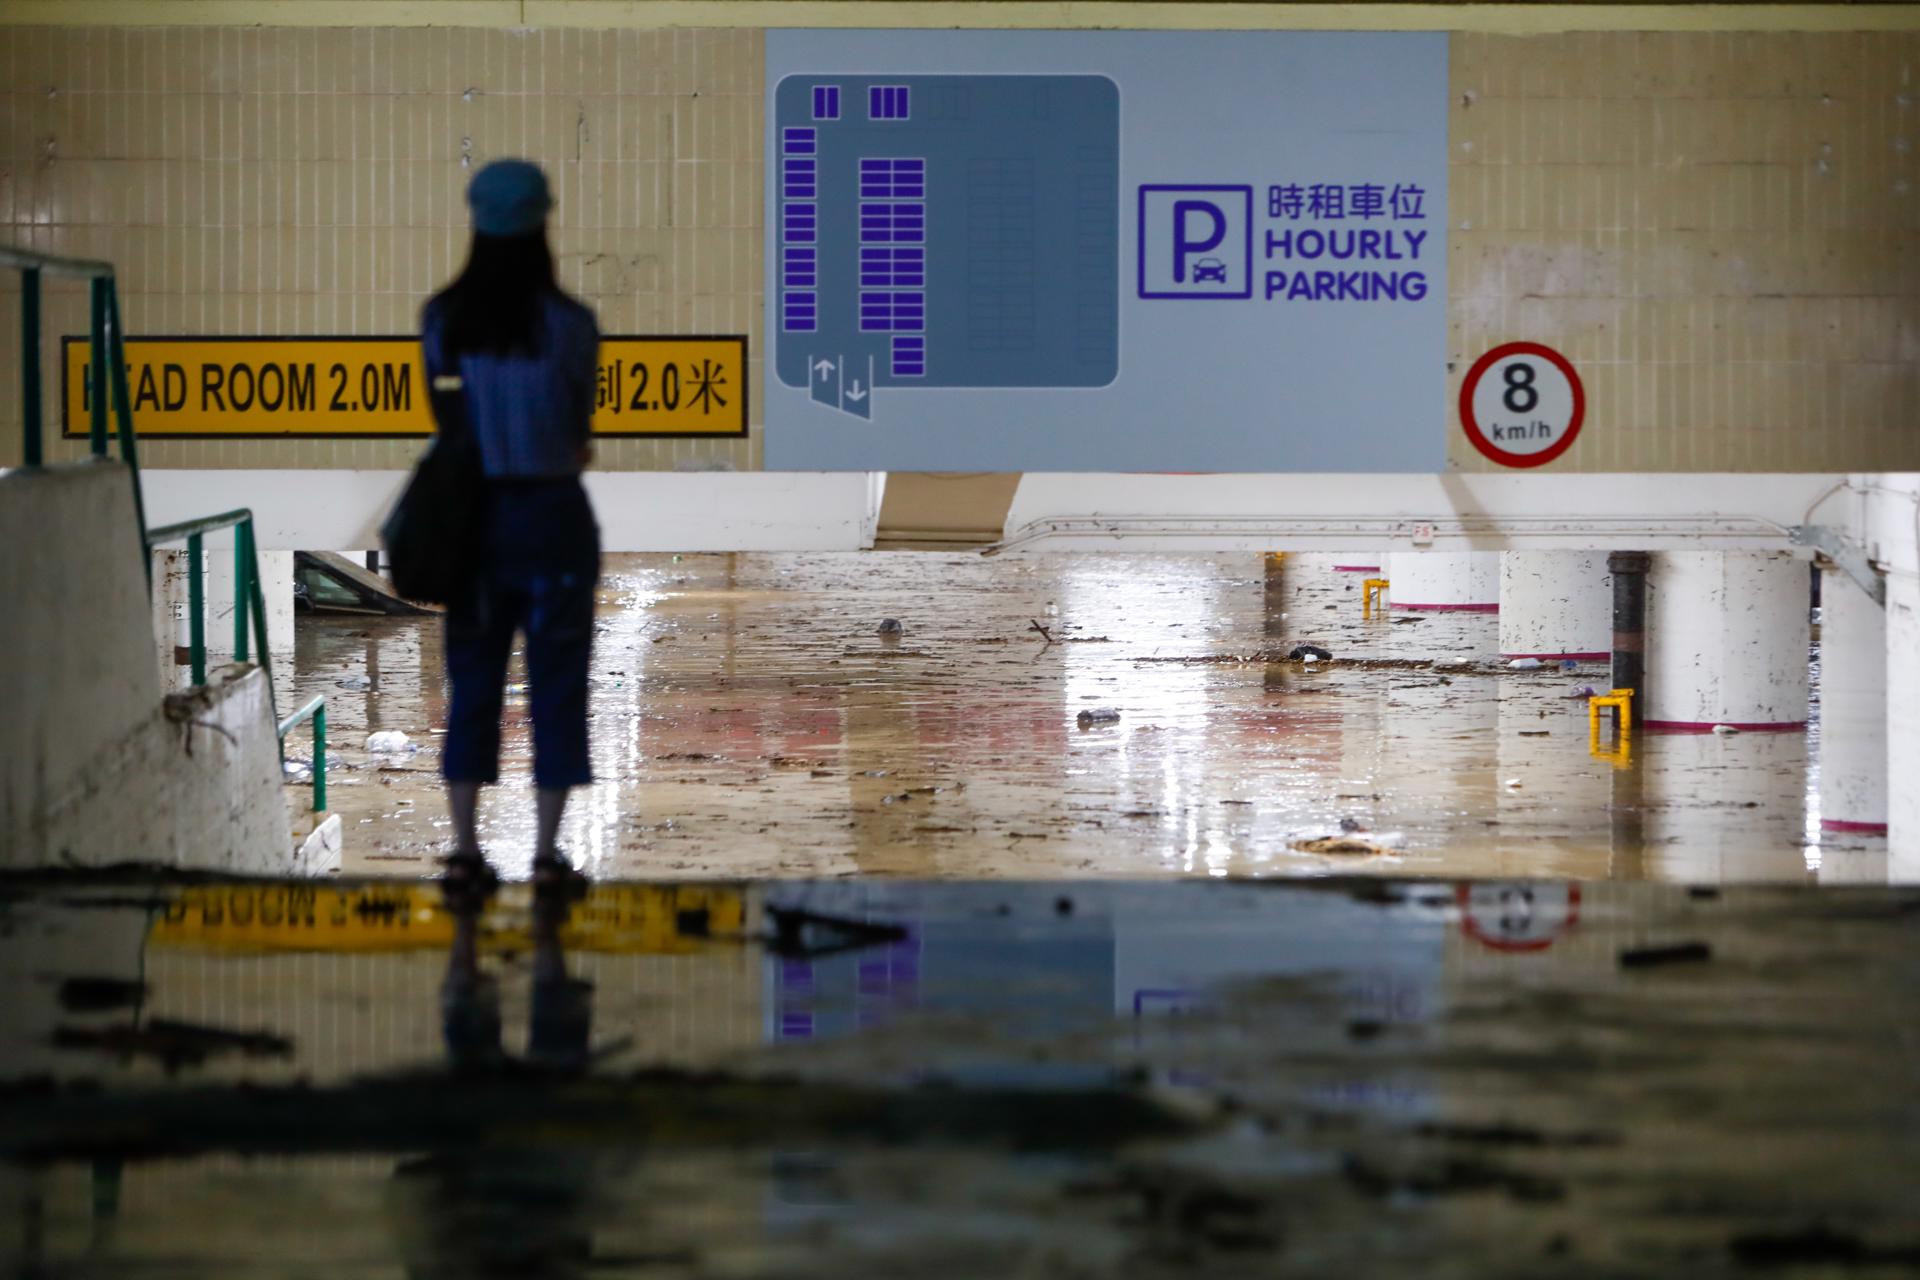 A woman stands in front of the entrance to a flooded car park following continued torrential rains hitting the city, in Hong Kong, China, 08 September 2023. EFE/EPA/DANIEL CENG